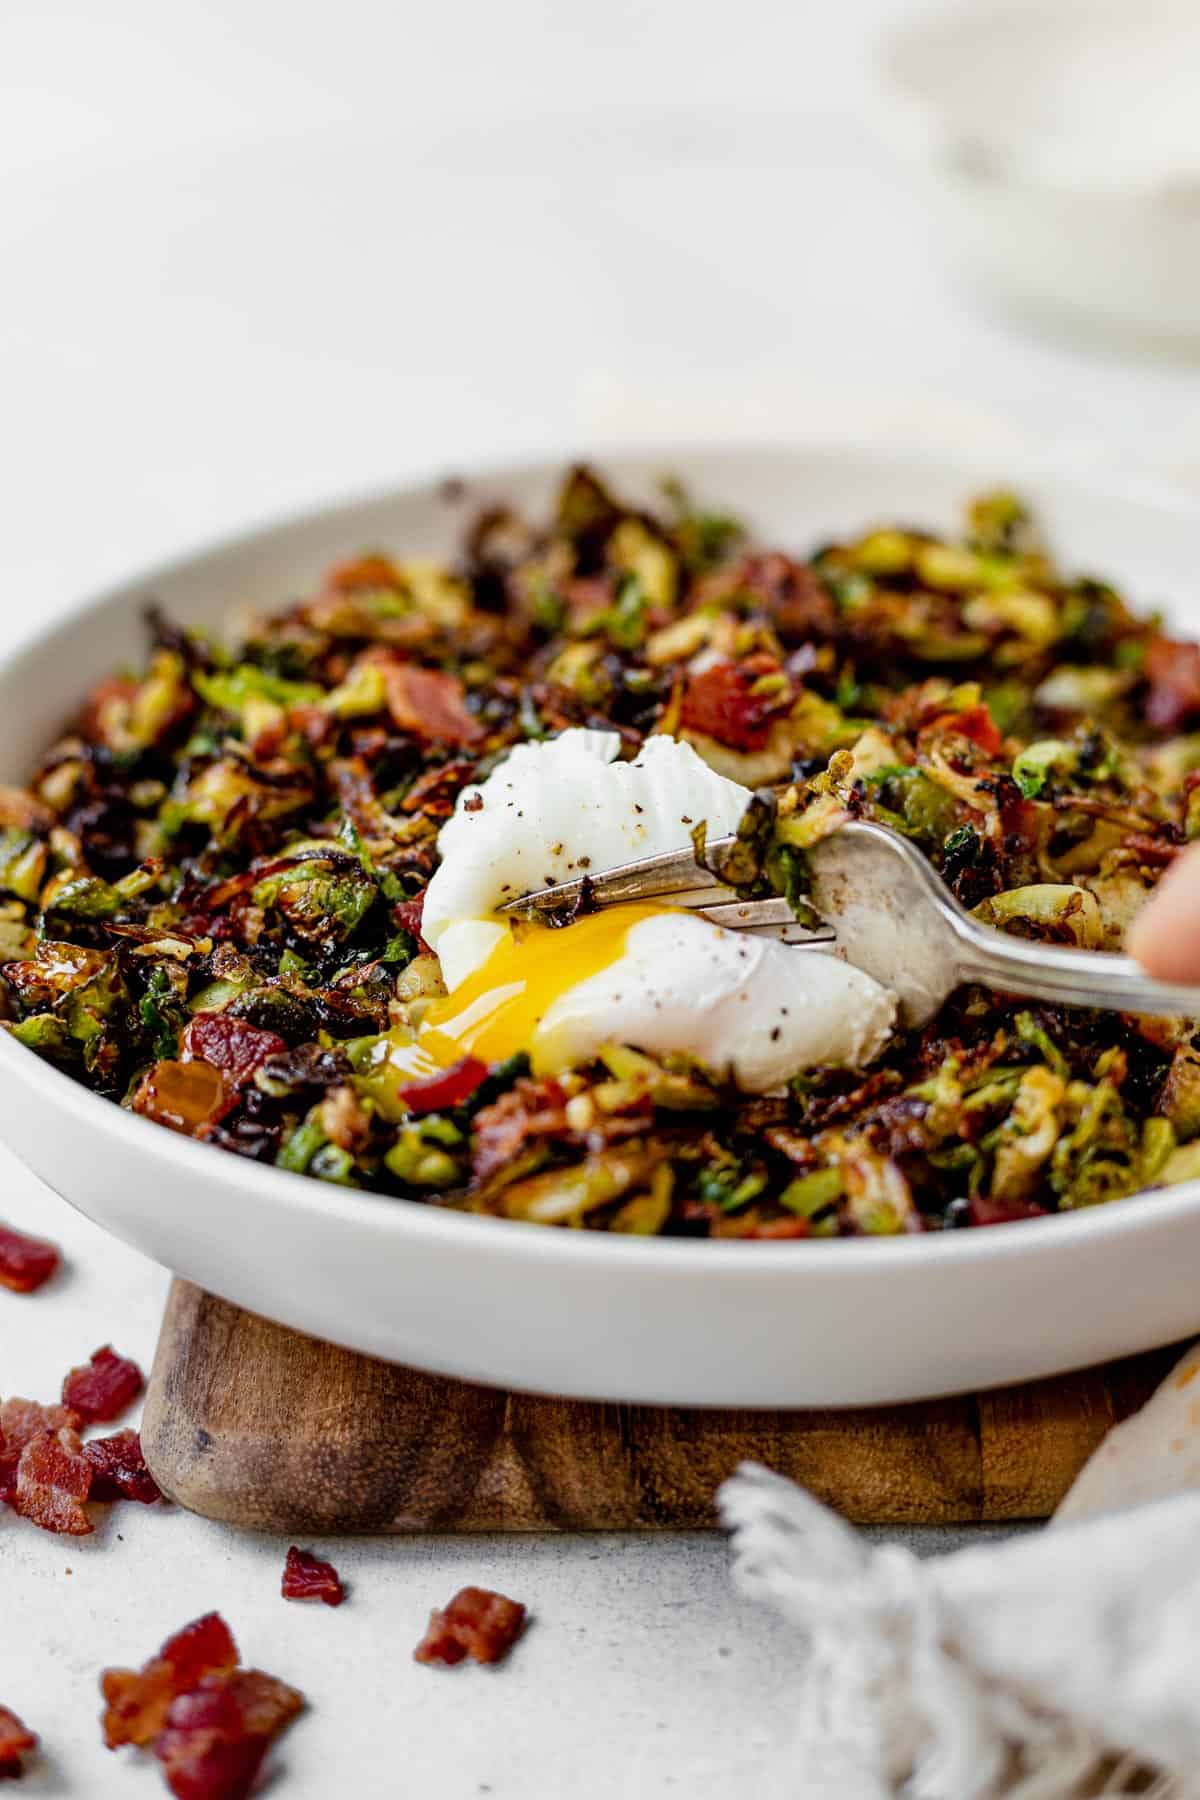 fork cutting into a poached egg on top of brussel sprout hash